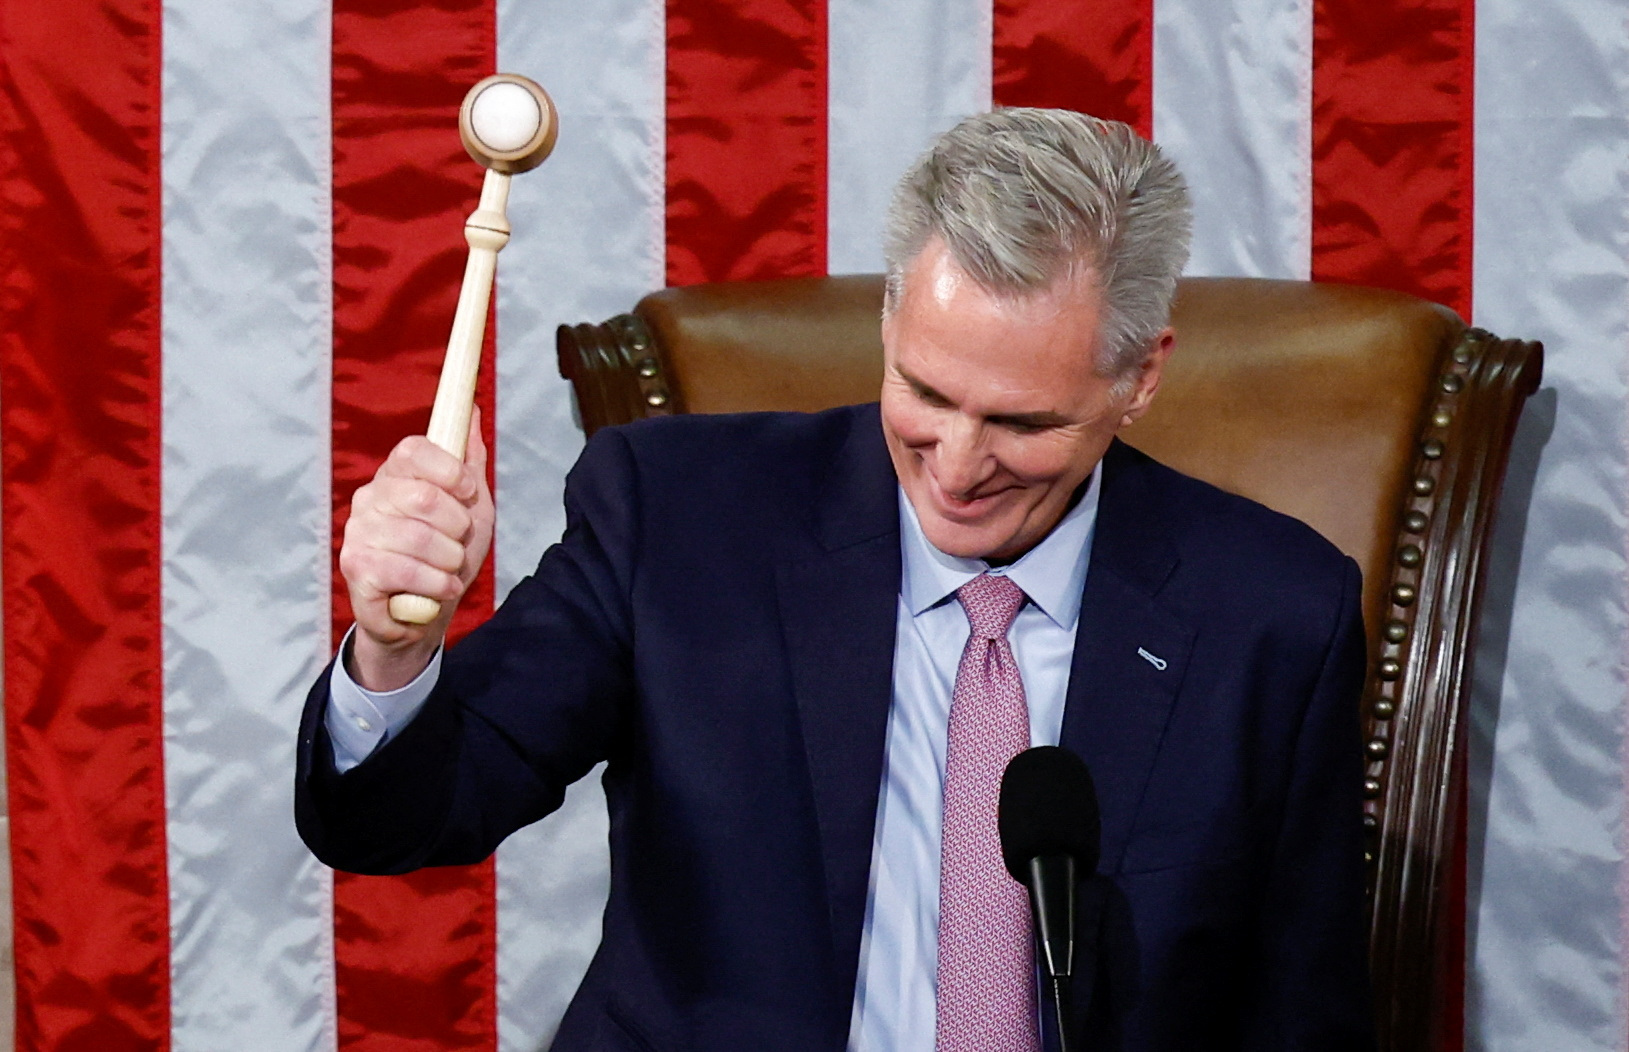 Kevin McCarthy elected Speaker of the House